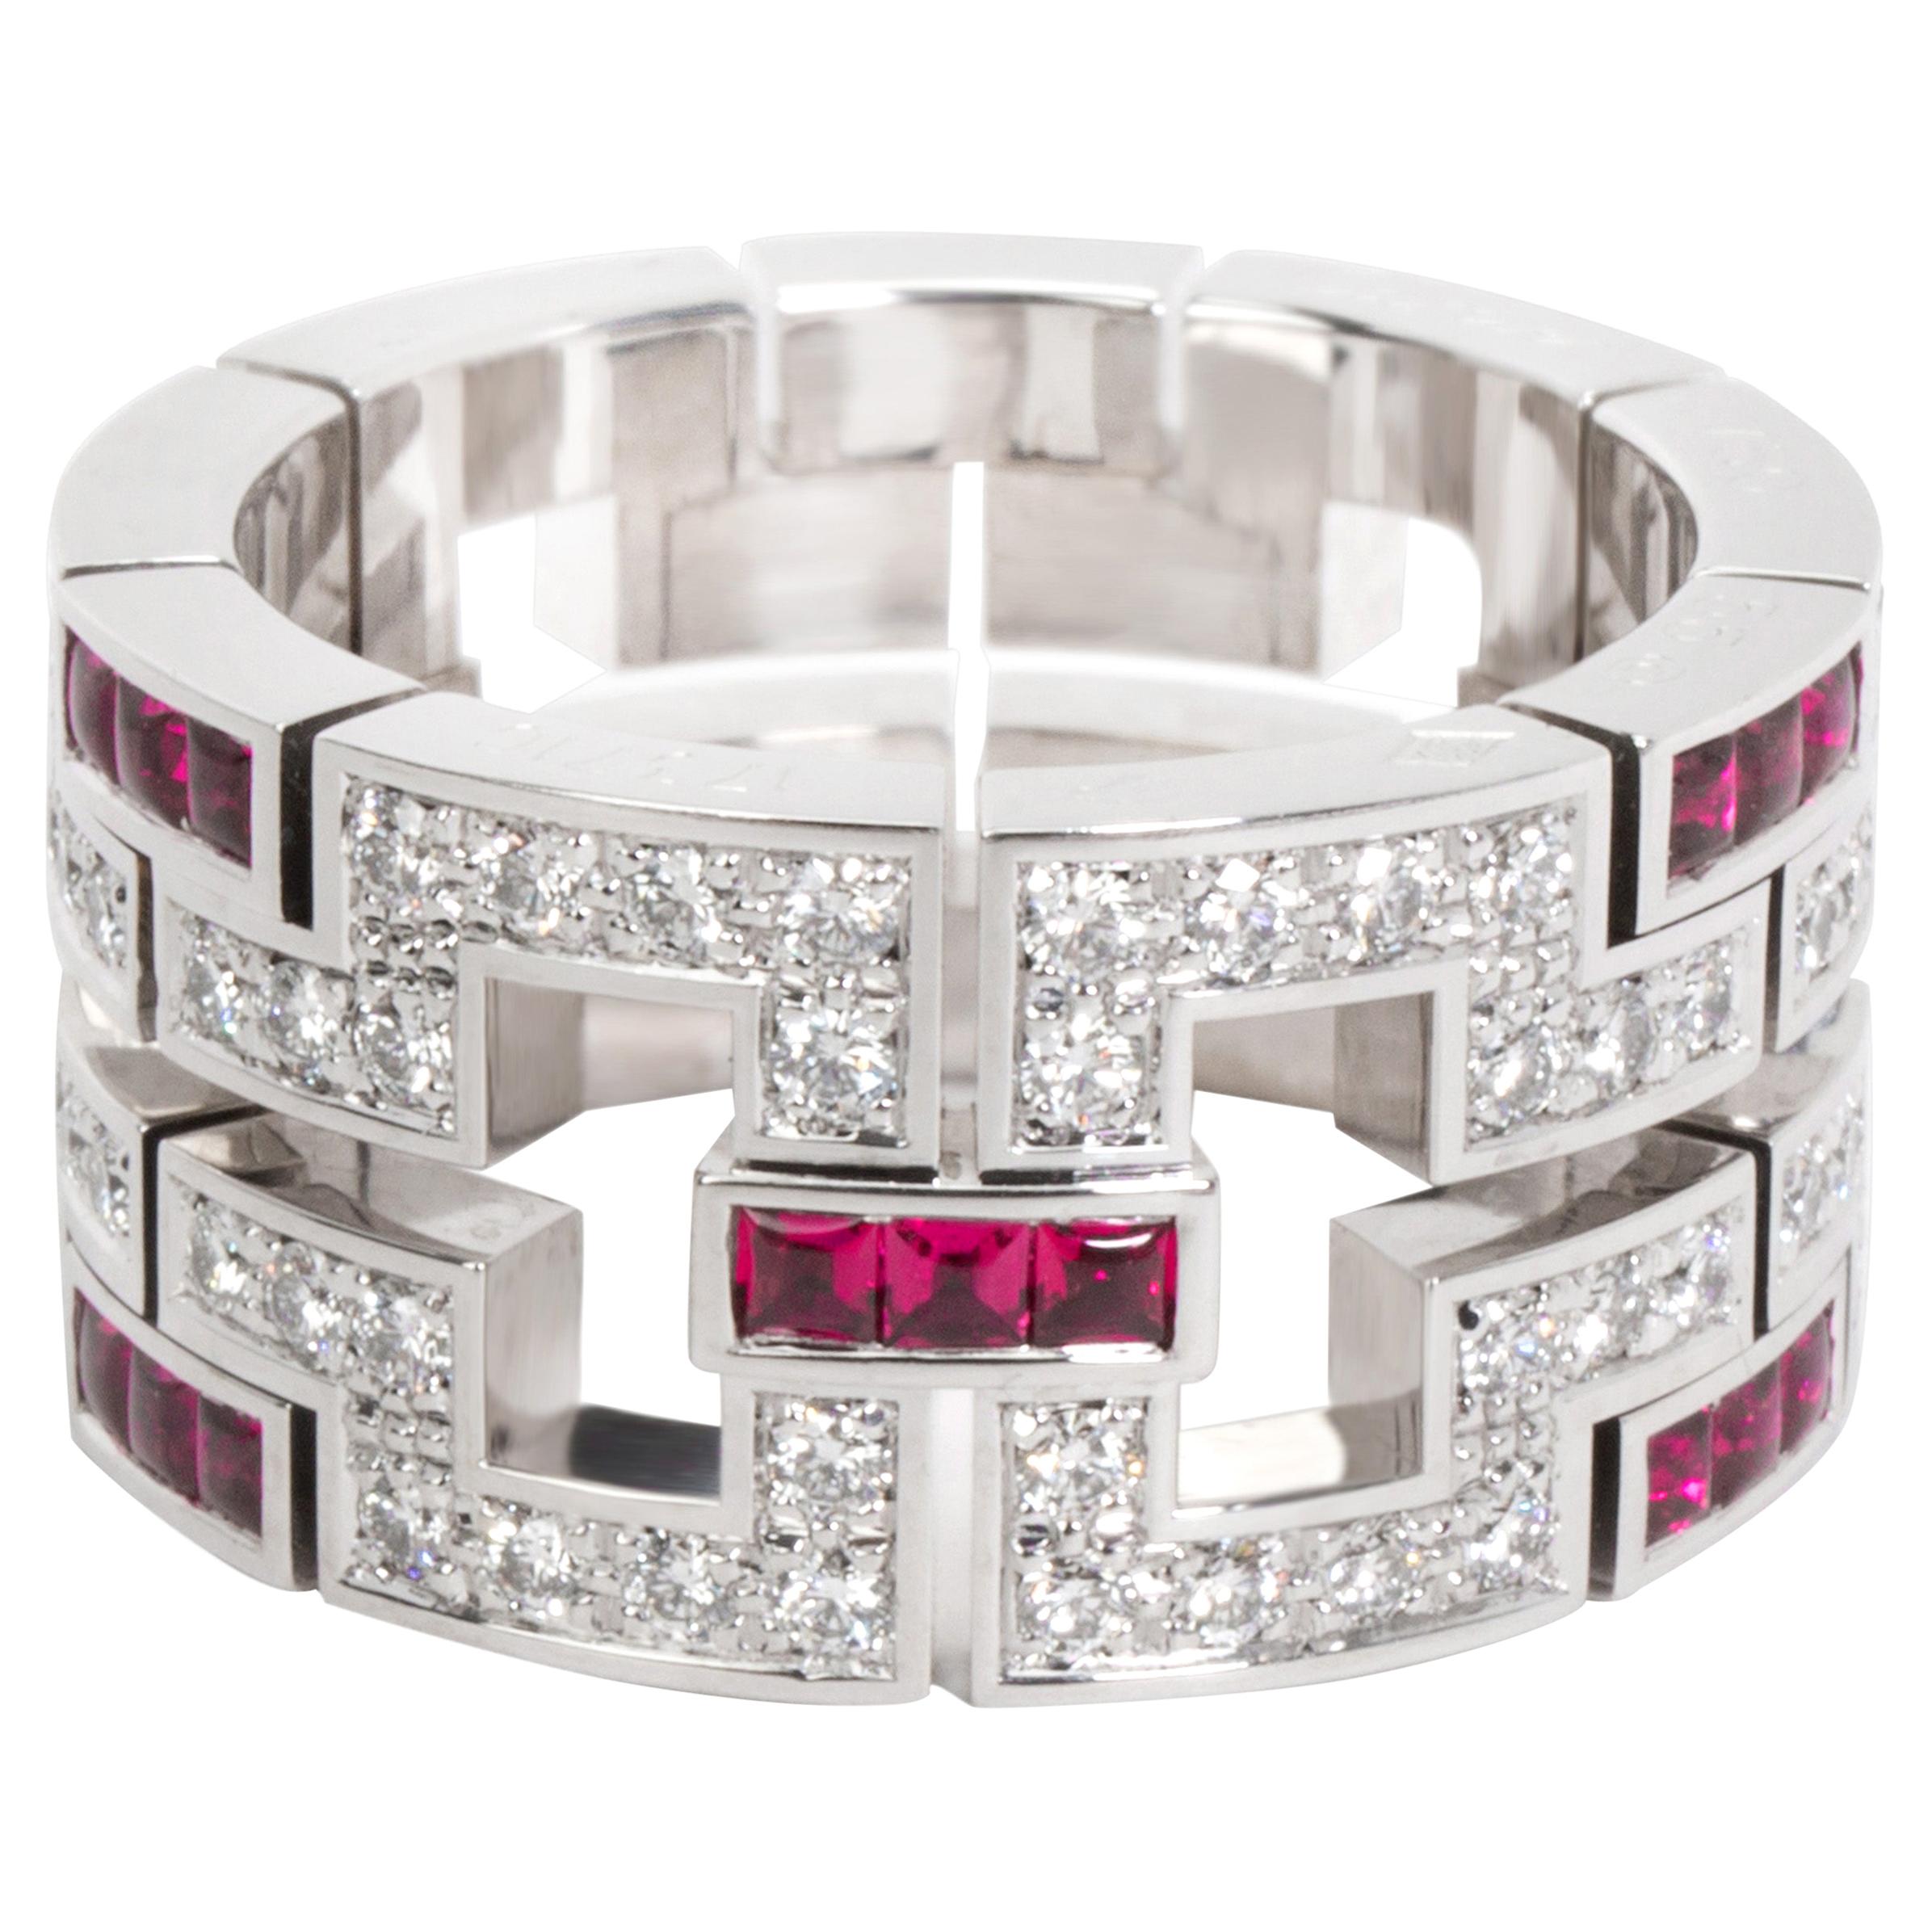 Cartier Diamond and Ruby Band in 18 Karat White Gold 0.95 Carat